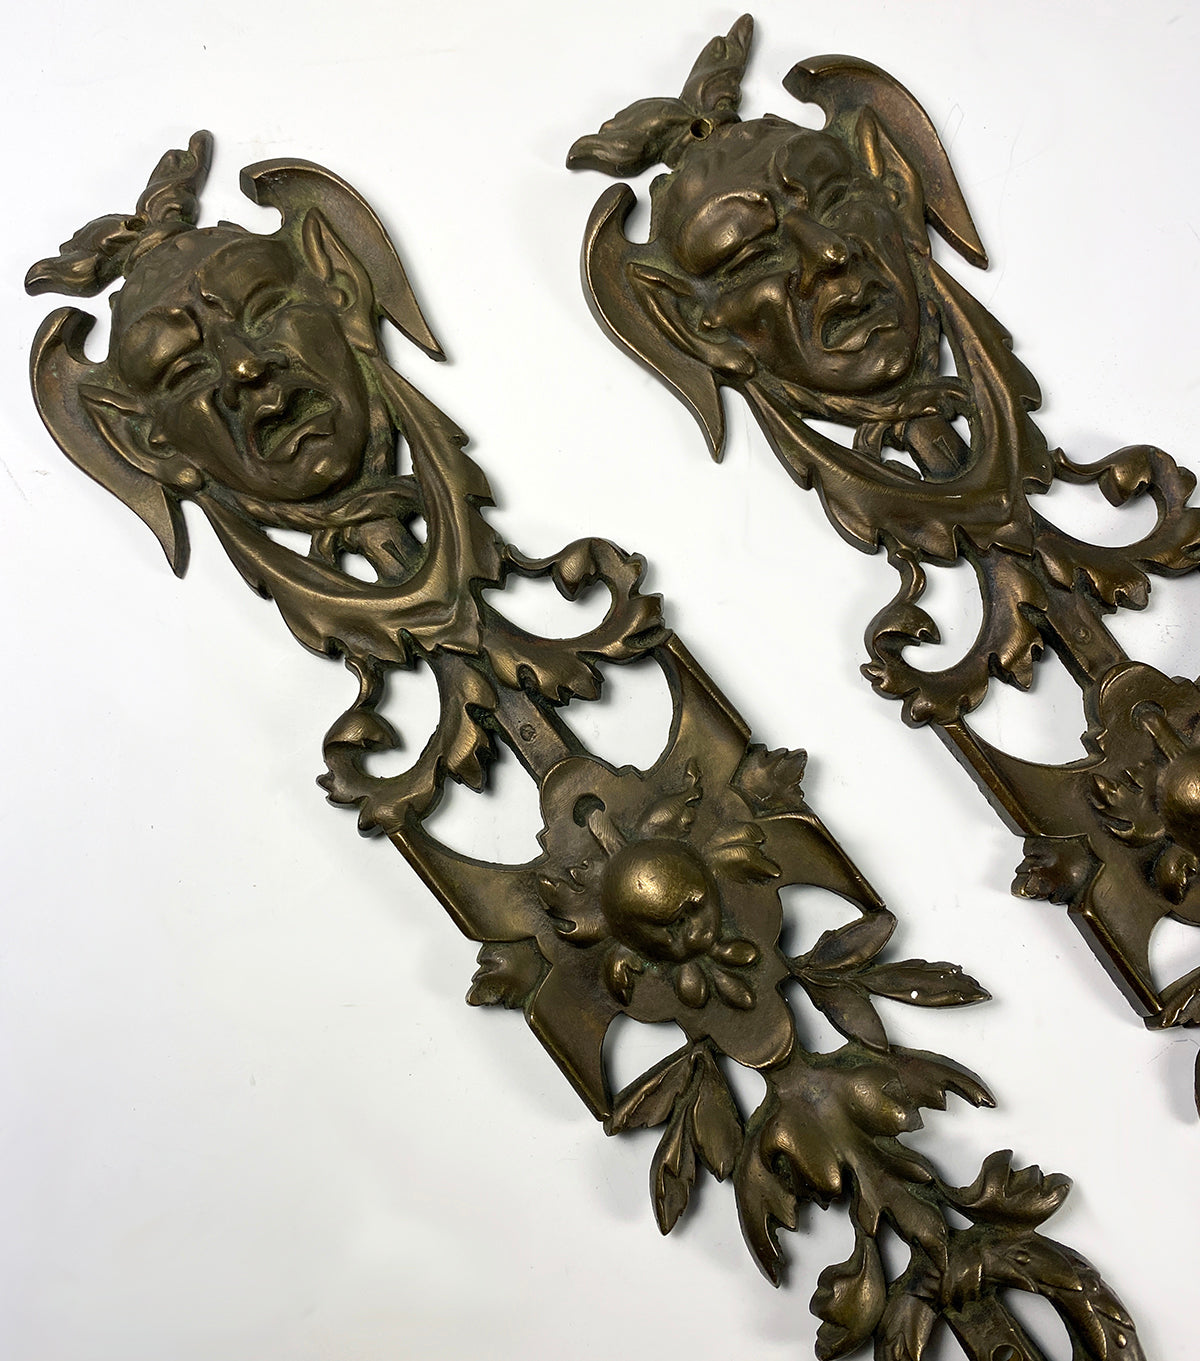 Antique French Pair Figural Neoclassical Cast Bronze 18.5" Tall Door or Furniture Ornaments